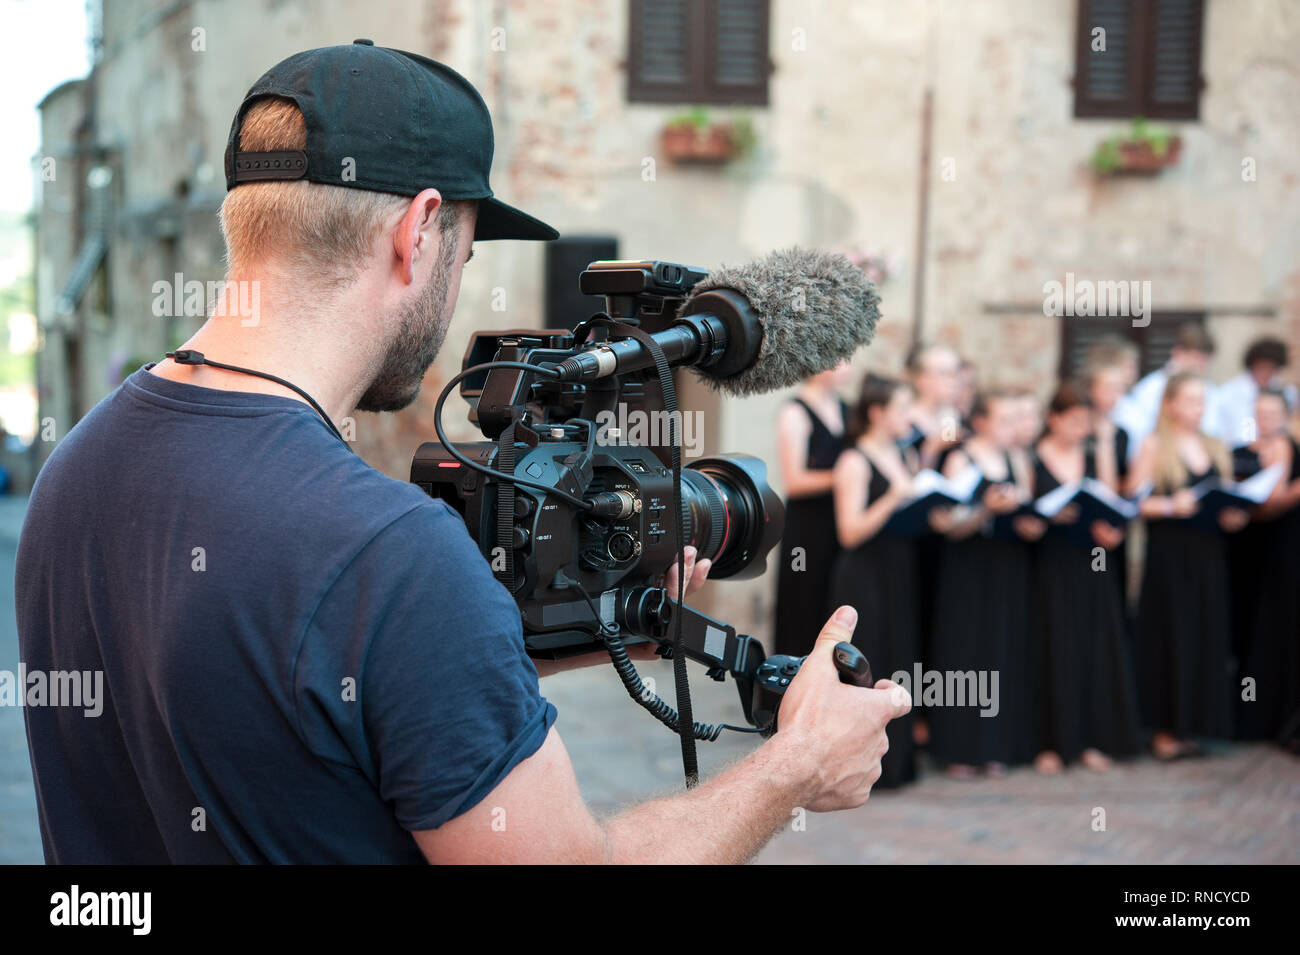 Cameraman captures video and audio whit professional video camera, during a choir live concert Stock Photo